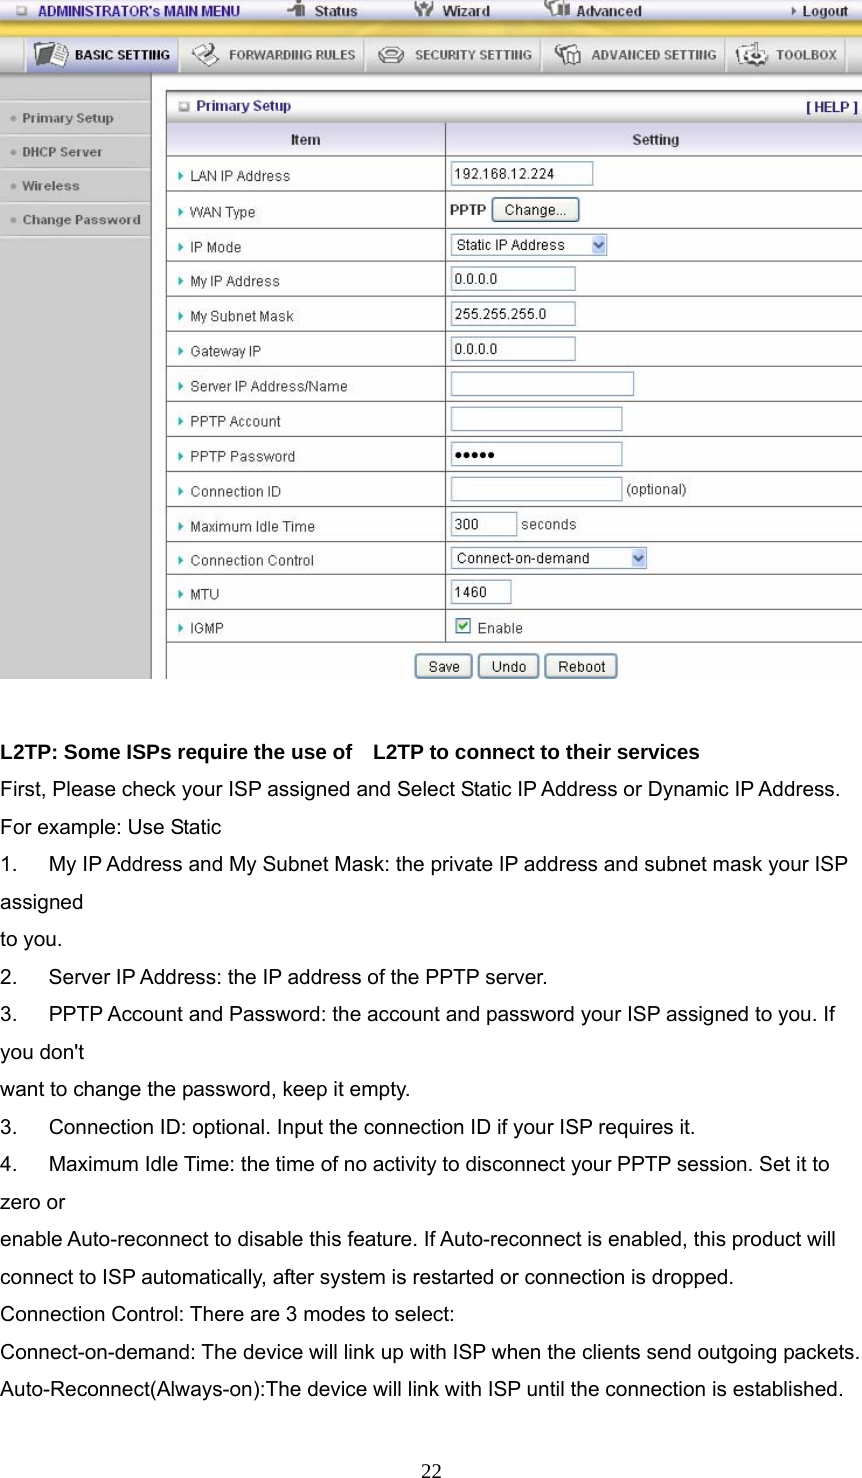  22  L2TP: Some ISPs require the use of    L2TP to connect to their services First, Please check your ISP assigned and Select Static IP Address or Dynamic IP Address. For example: Use Static 1.      My IP Address and My Subnet Mask: the private IP address and subnet mask your ISP assigned  to you.   2.    Server IP Address: the IP address of the PPTP server.   3.   PPTP Account and Password: the account and password your ISP assigned to you. If you don&apos;t want to change the password, keep it empty.   3.      Connection ID: optional. Input the connection ID if your ISP requires it.   4.      Maximum Idle Time: the time of no activity to disconnect your PPTP session. Set it to zero or   enable Auto-reconnect to disable this feature. If Auto-reconnect is enabled, this product will   connect to ISP automatically, after system is restarted or connection is dropped. Connection Control: There are 3 modes to select: Connect-on-demand: The device will link up with ISP when the clients send outgoing packets. Auto-Reconnect(Always-on):The device will link with ISP until the connection is established. 